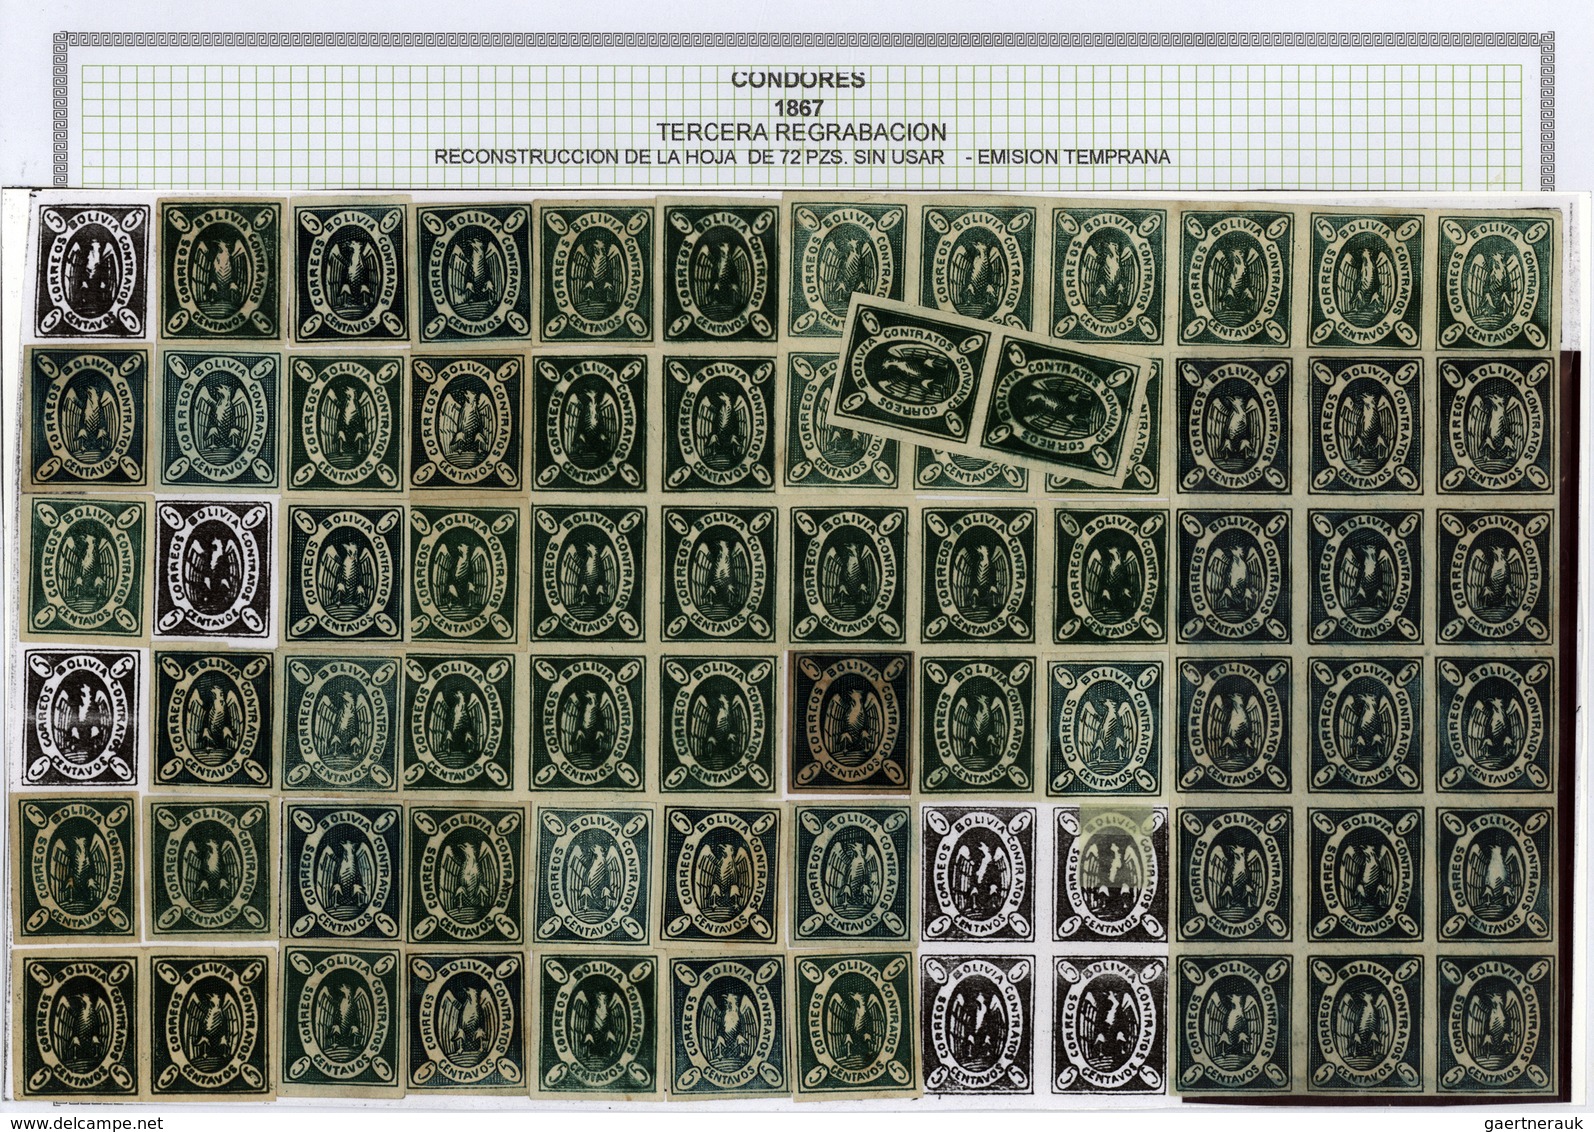 **/*/O/Br Bolivien: 1867: THE CONDOR ISSUE: A scarce and unique special collection of a most exciting classica